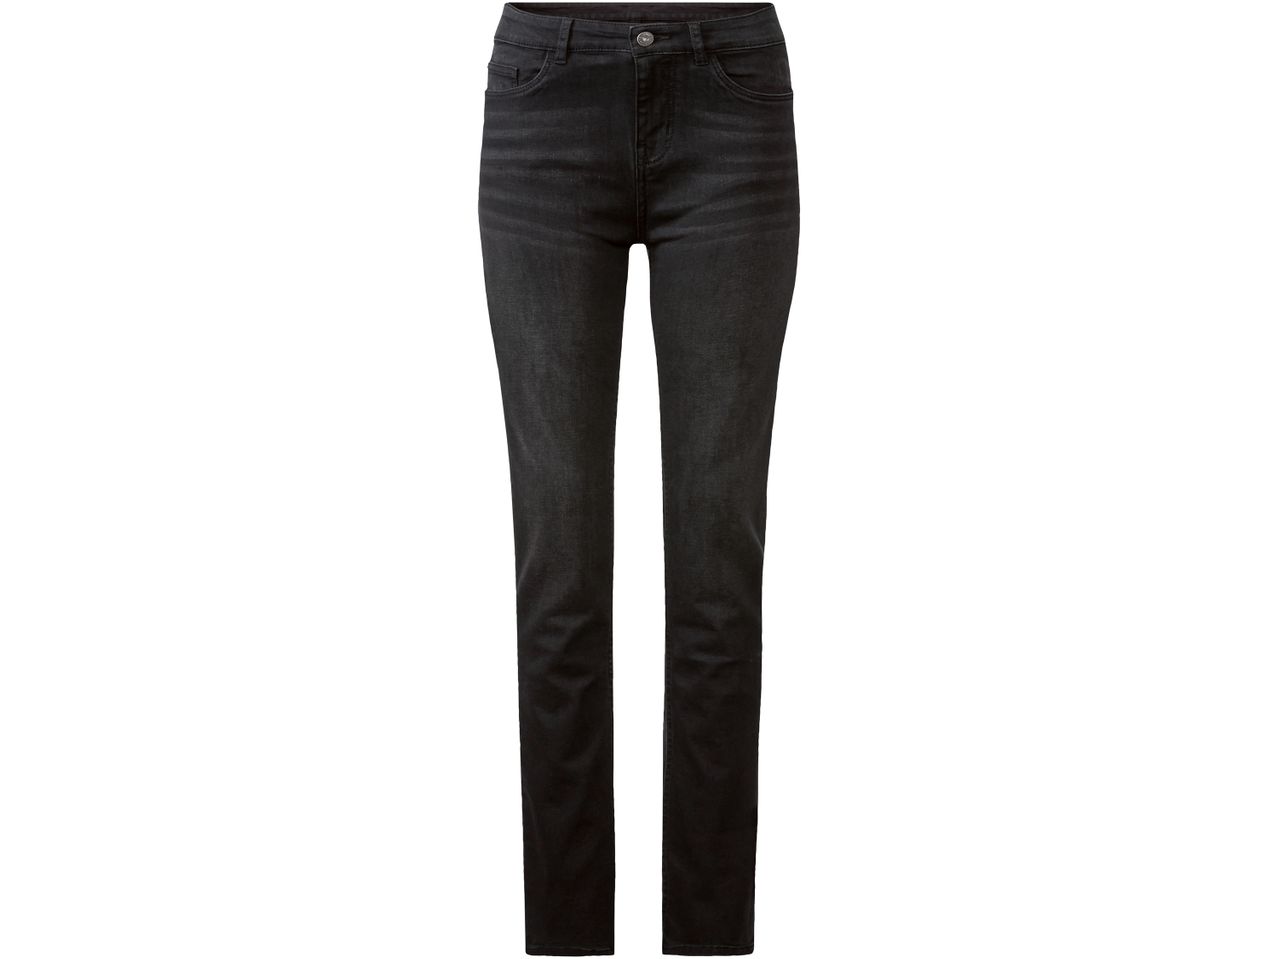 Go to full screen view: Ladies’ Jeans “Slim Fit” - Image 1